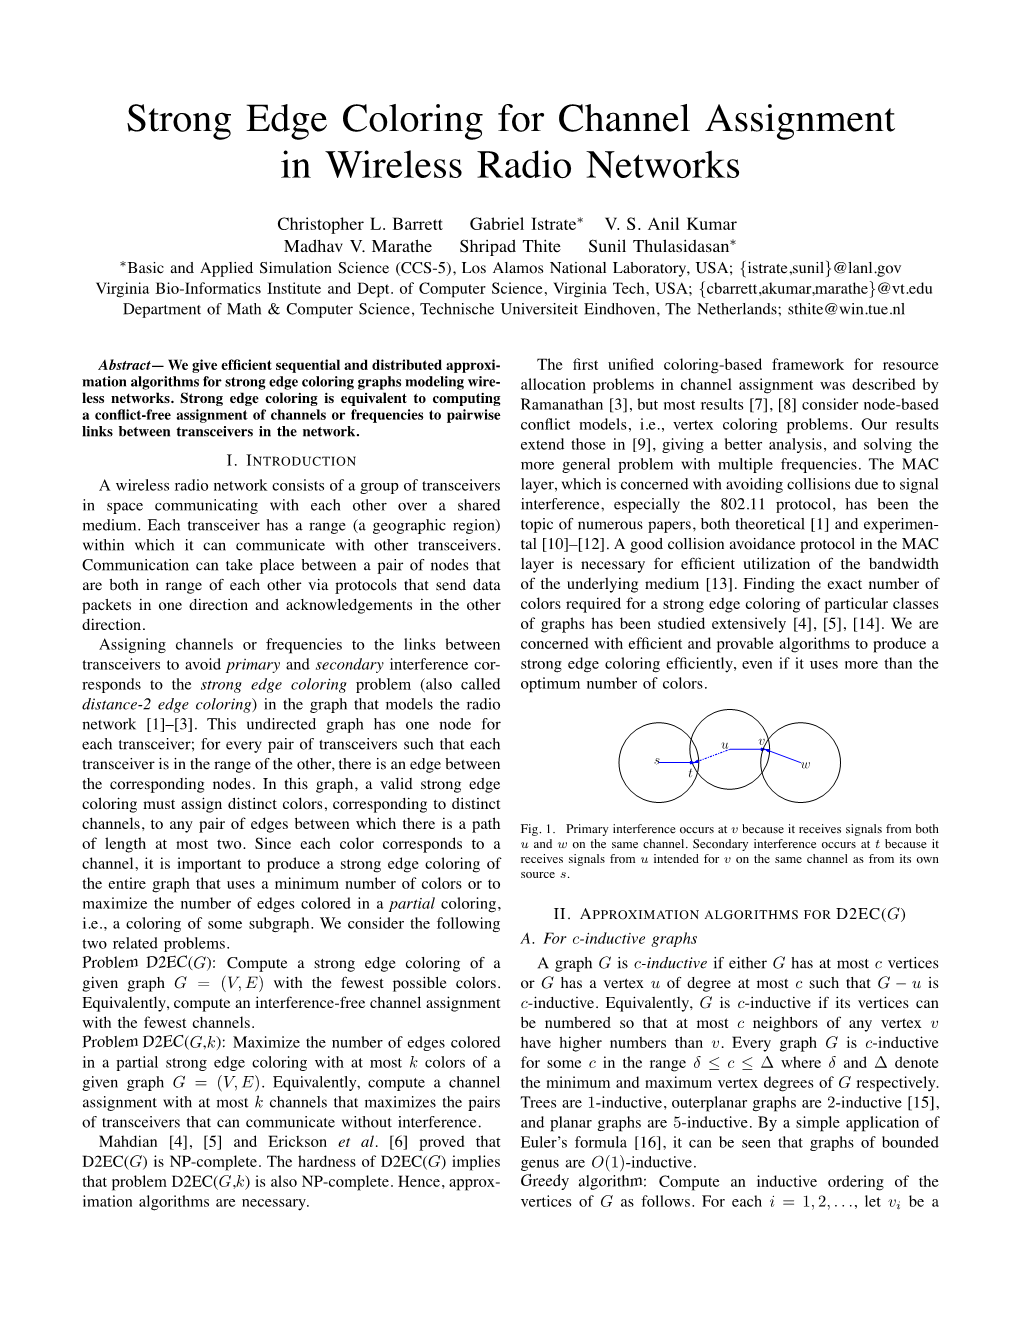 Strong Edge Coloring for Channel Assignment in Wireless Radio Networks